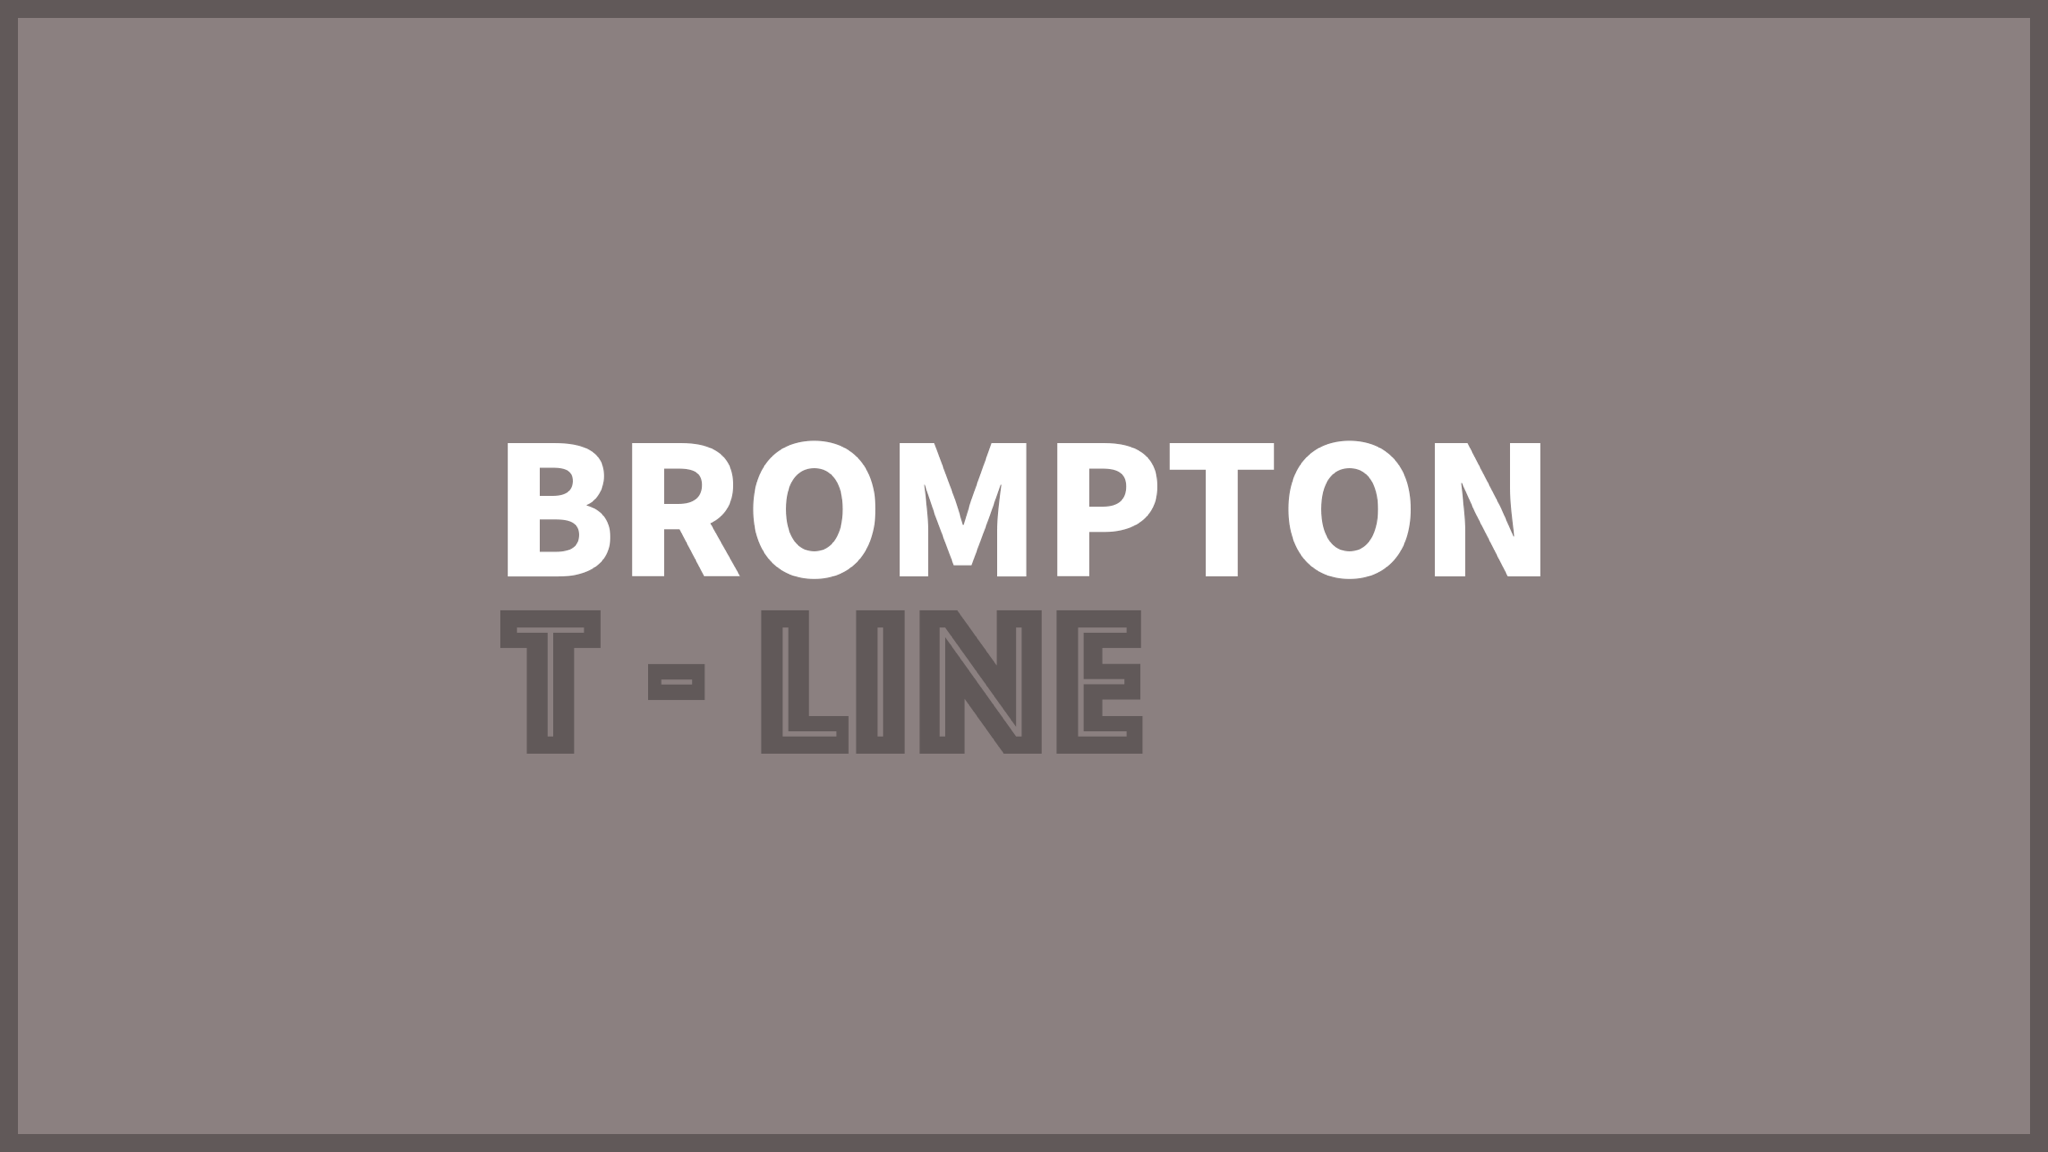 Brompton t line introduced